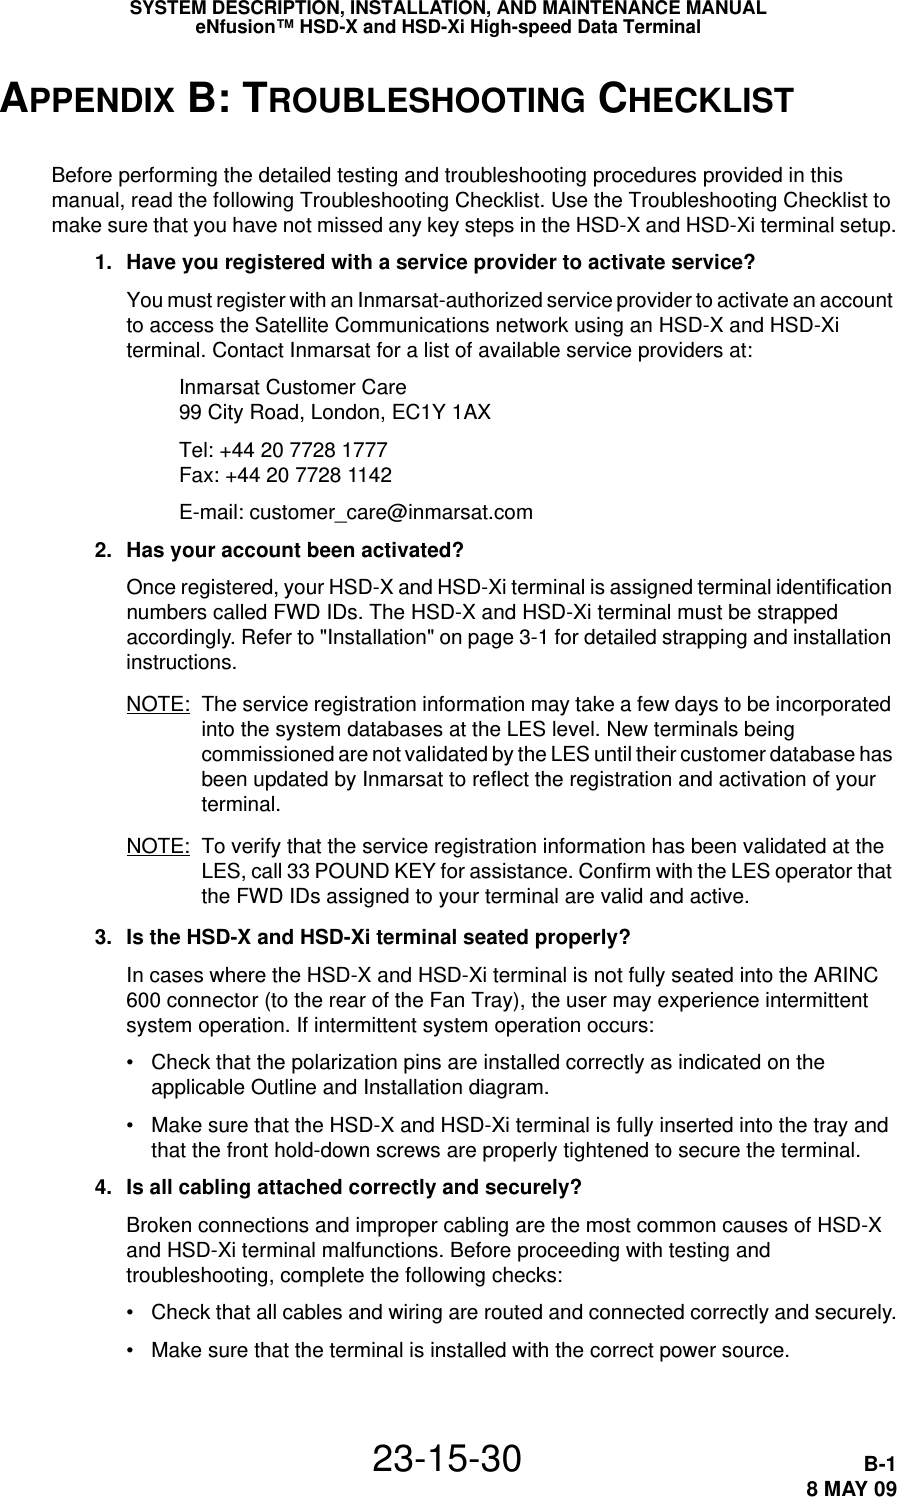 SYSTEM DESCRIPTION, INSTALLATION, AND MAINTENANCE MANUALeNfusion™ HSD-X and HSD-Xi High-speed Data Terminal23-15-30 B-18 MAY 09APPENDIX B: TROUBLESHOOTING CHECKLISTBefore performing the detailed testing and troubleshooting procedures provided in this manual, read the following Troubleshooting Checklist. Use the Troubleshooting Checklist to make sure that you have not missed any key steps in the HSD-X and HSD-Xi terminal setup. 1. Have you registered with a service provider to activate service?You must register with an Inmarsat-authorized service provider to activate an account to access the Satellite Communications network using an HSD-X and HSD-Xi terminal. Contact Inmarsat for a list of available service providers at:Inmarsat Customer Care 99 City Road, London, EC1Y 1AXTel: +44 20 7728 1777 Fax: +44 20 7728 1142E-mail: customer_care@inmarsat.com 2. Has your account been activated? Once registered, your HSD-X and HSD-Xi terminal is assigned terminal identification numbers called FWD IDs. The HSD-X and HSD-Xi terminal must be strapped accordingly. Refer to &quot;Installation&quot; on page 3-1 for detailed strapping and installation instructions. NOTE: The service registration information may take a few days to be incorporated into the system databases at the LES level. New terminals being commissioned are not validated by the LES until their customer database has been updated by Inmarsat to reflect the registration and activation of your terminal.NOTE: To verify that the service registration information has been validated at the LES, call 33 POUND KEY for assistance. Confirm with the LES operator that the FWD IDs assigned to your terminal are valid and active. 3. Is the HSD-X and HSD-Xi terminal seated properly?In cases where the HSD-X and HSD-Xi terminal is not fully seated into the ARINC 600 connector (to the rear of the Fan Tray), the user may experience intermittent system operation. If intermittent system operation occurs:• Check that the polarization pins are installed correctly as indicated on the applicable Outline and Installation diagram. • Make sure that the HSD-X and HSD-Xi terminal is fully inserted into the tray and that the front hold-down screws are properly tightened to secure the terminal. 4. Is all cabling attached correctly and securely? Broken connections and improper cabling are the most common causes of HSD-X and HSD-Xi terminal malfunctions. Before proceeding with testing and troubleshooting, complete the following checks:• Check that all cables and wiring are routed and connected correctly and securely.• Make sure that the terminal is installed with the correct power source. 